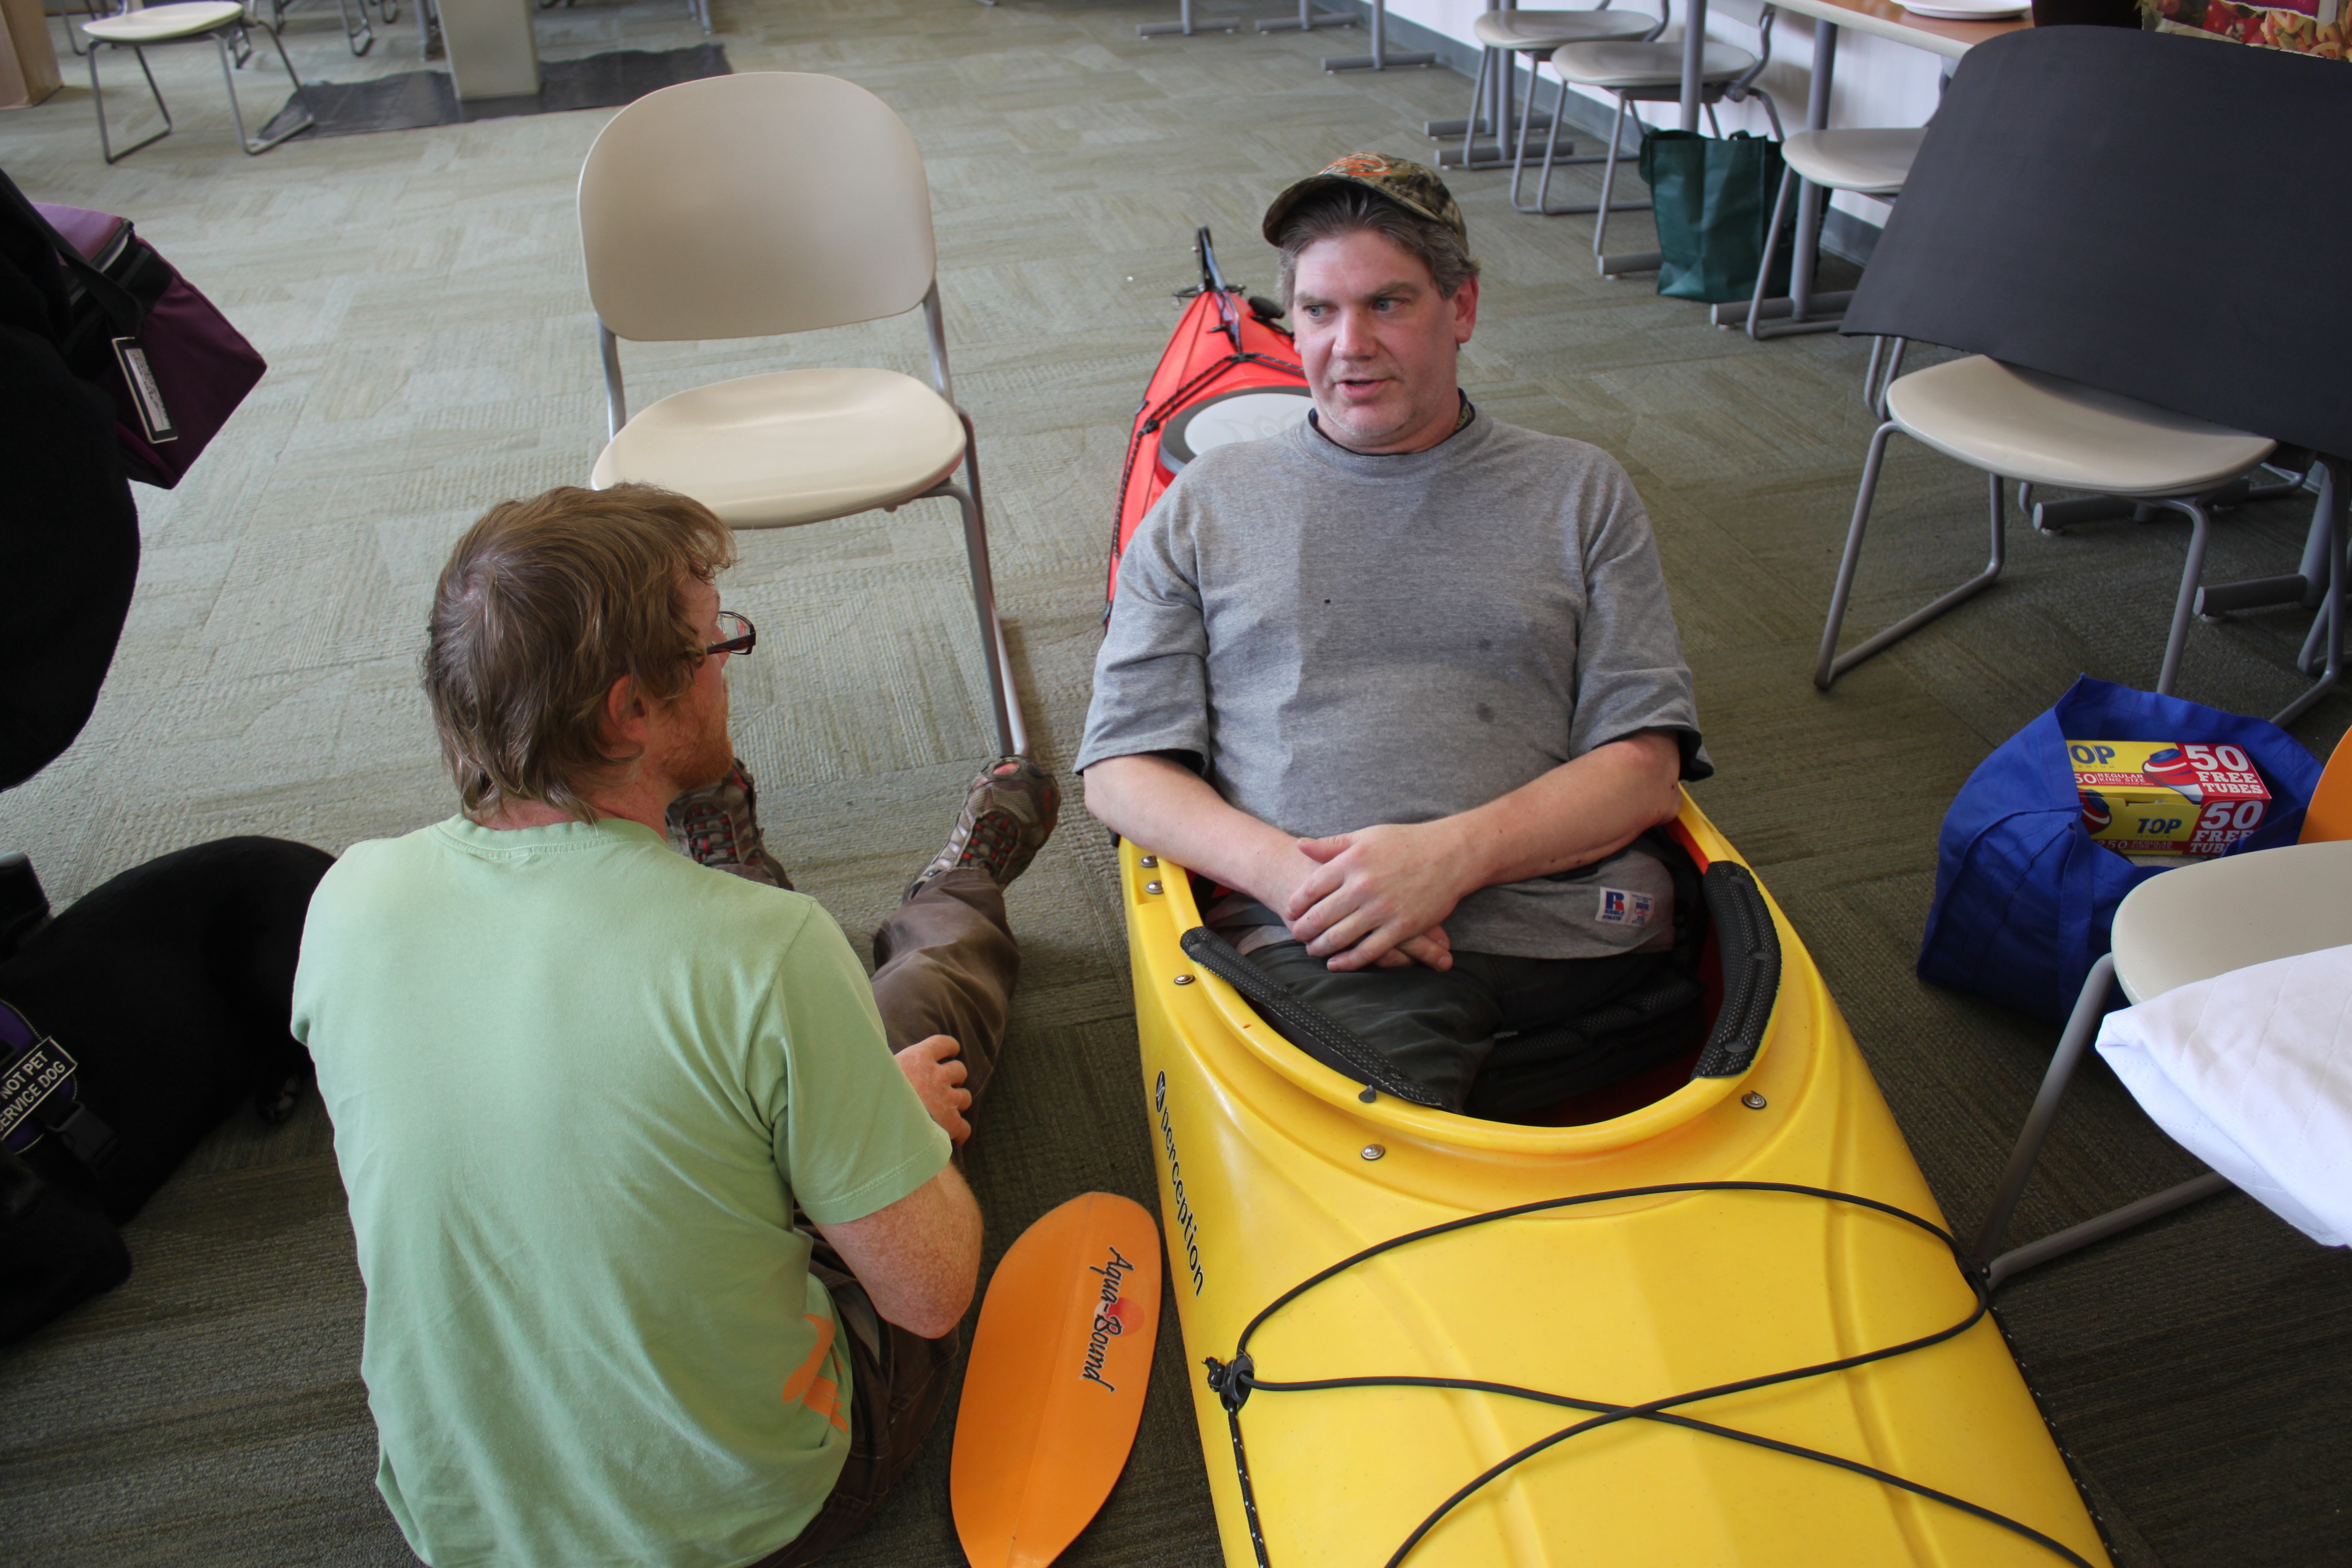 J.C. Terrill says sitting in a kayak is more comfortable than sitting in a chair. (Photo by Lisa Phu/KTOO)